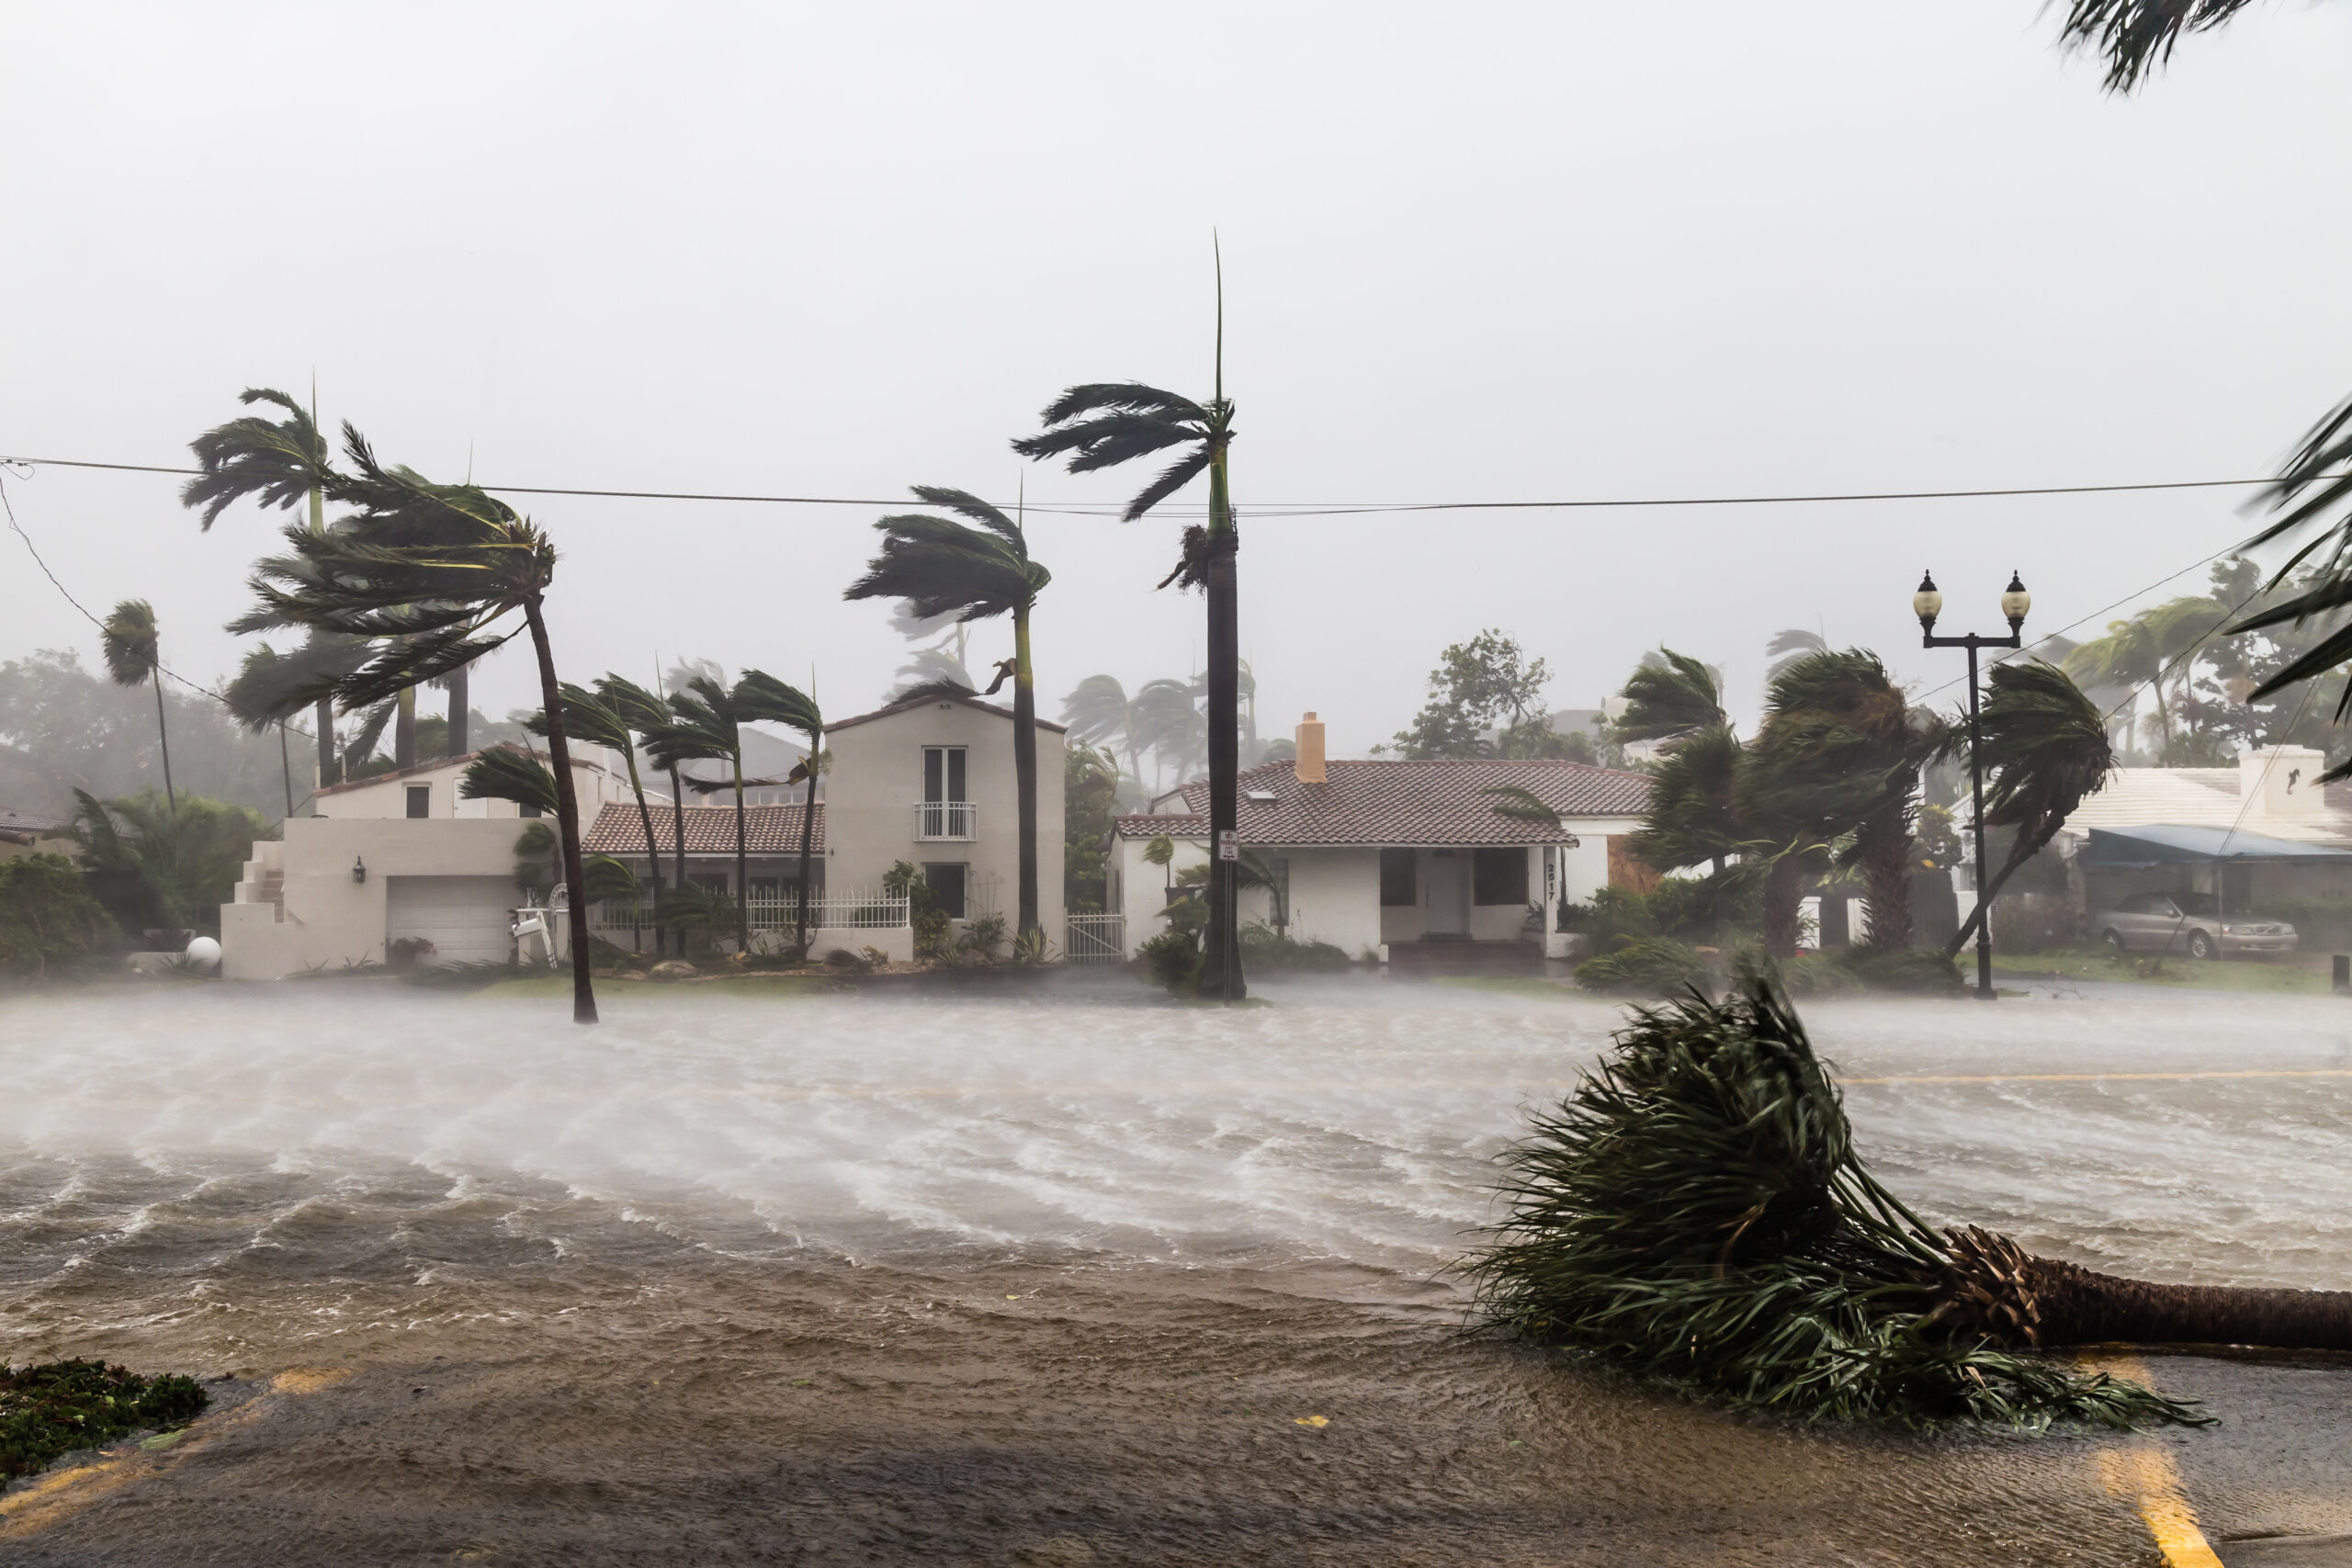 IoT is helping communities mitigate the effects of hurricanes and other natural disasters